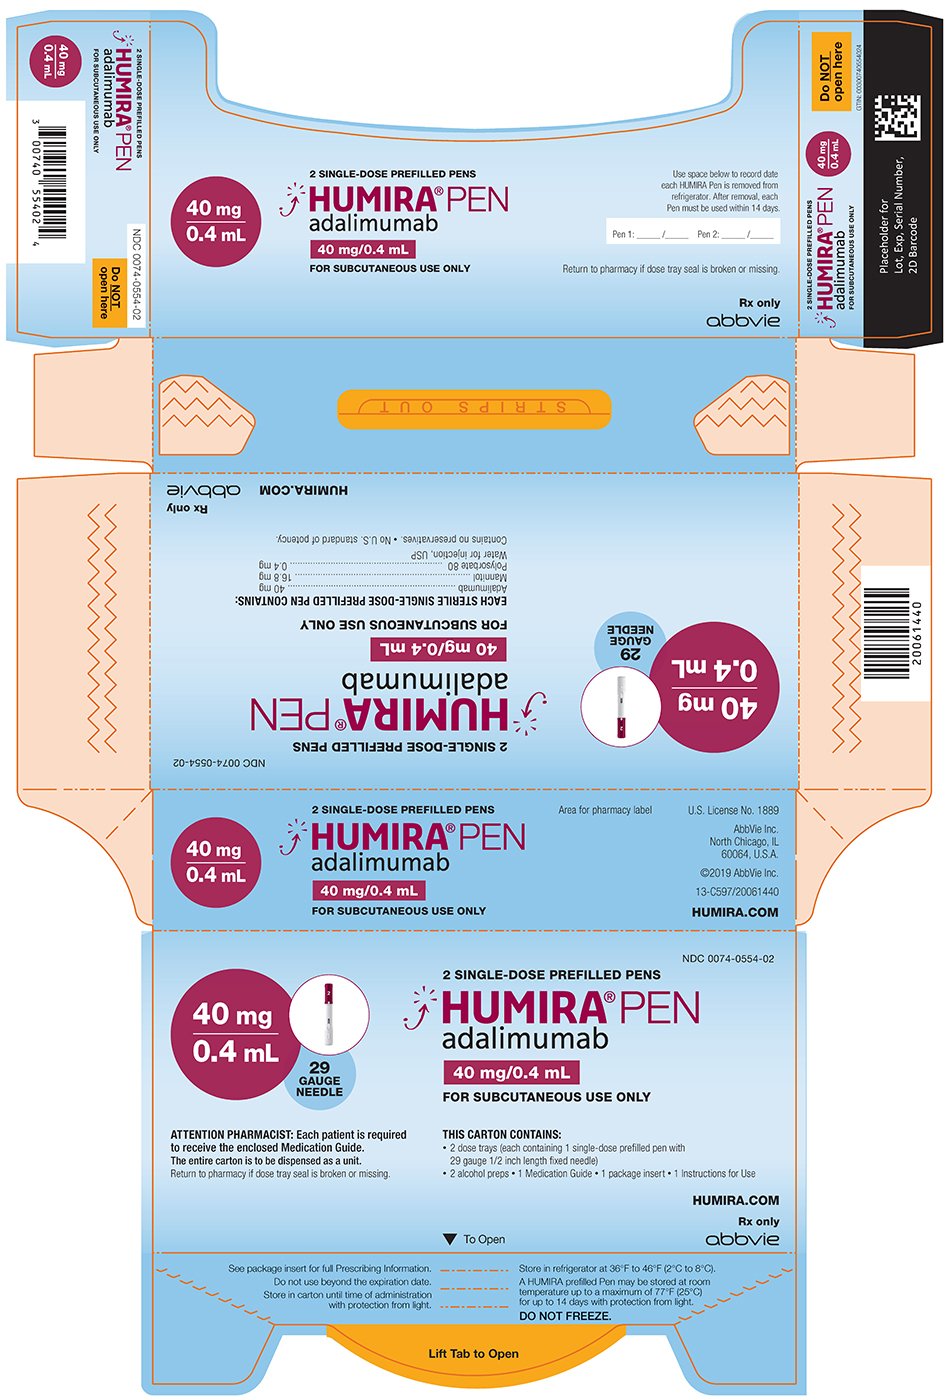 humira-fda-prescribing-information-side-effects-and-uses